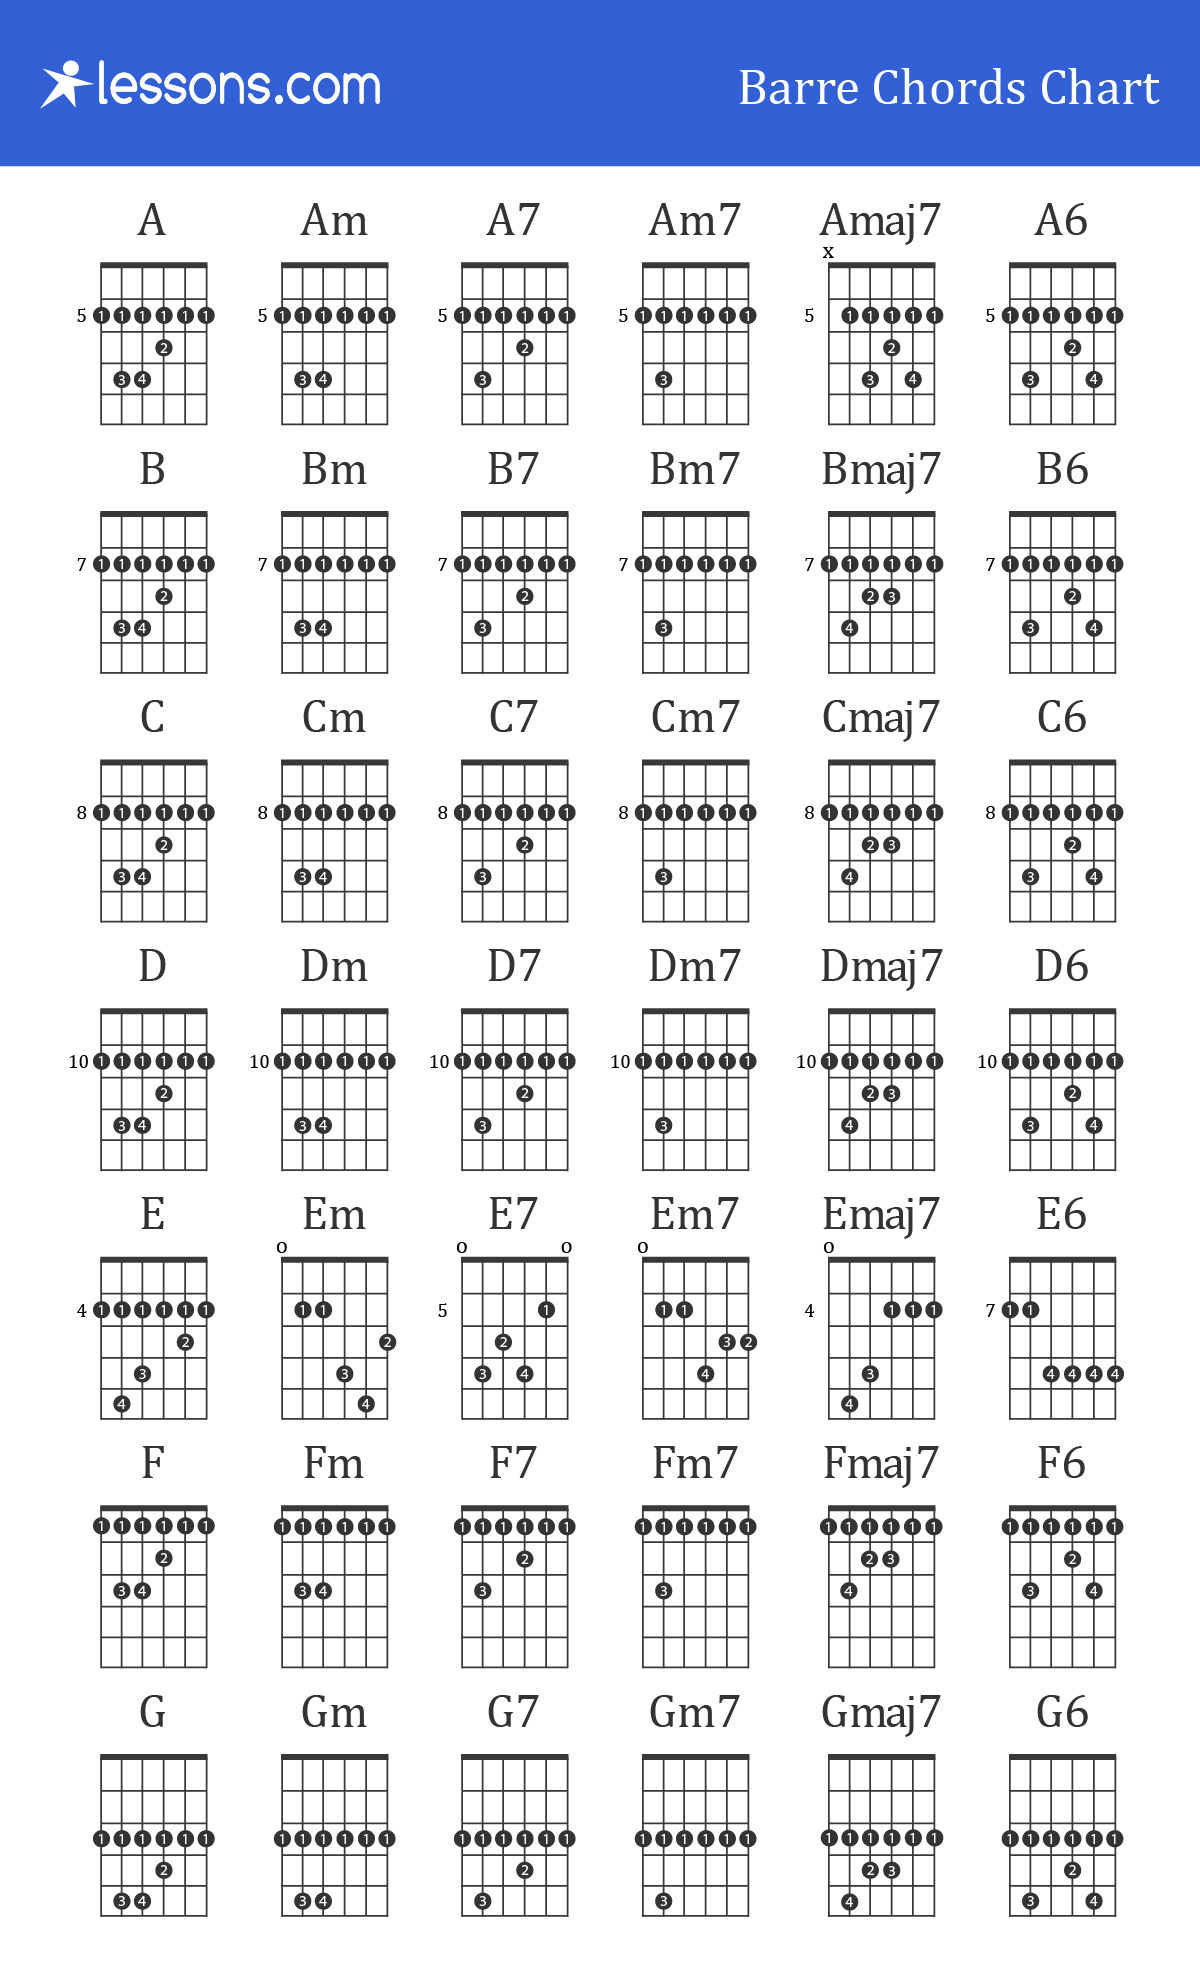 Dm7 Guitar Chord Guitar Chords The Complete Guide With Charts How Tos More